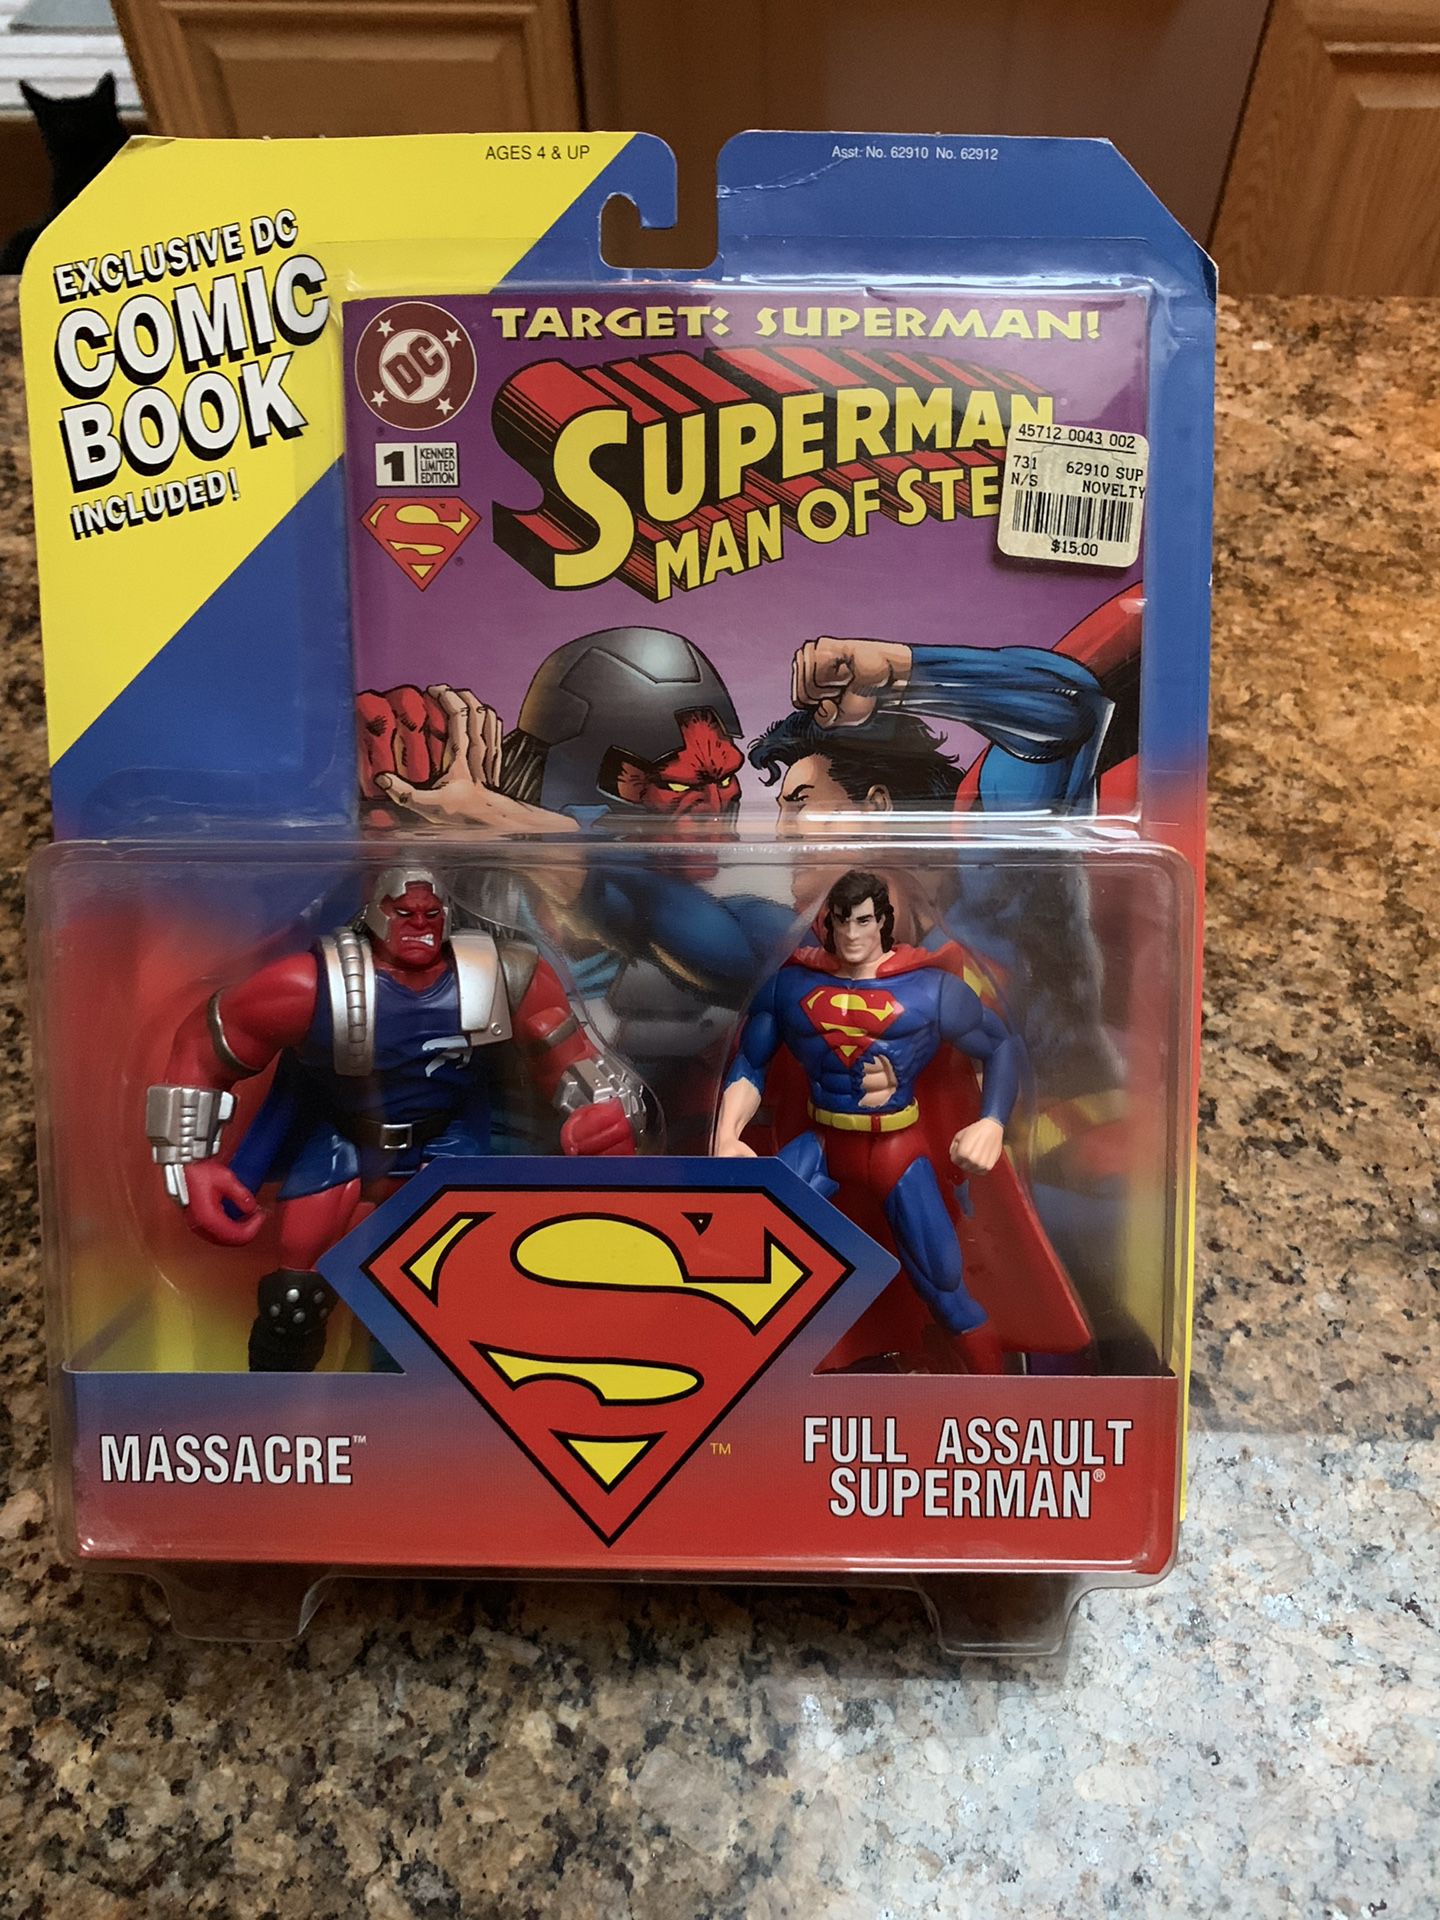 Superman action figure and comic book